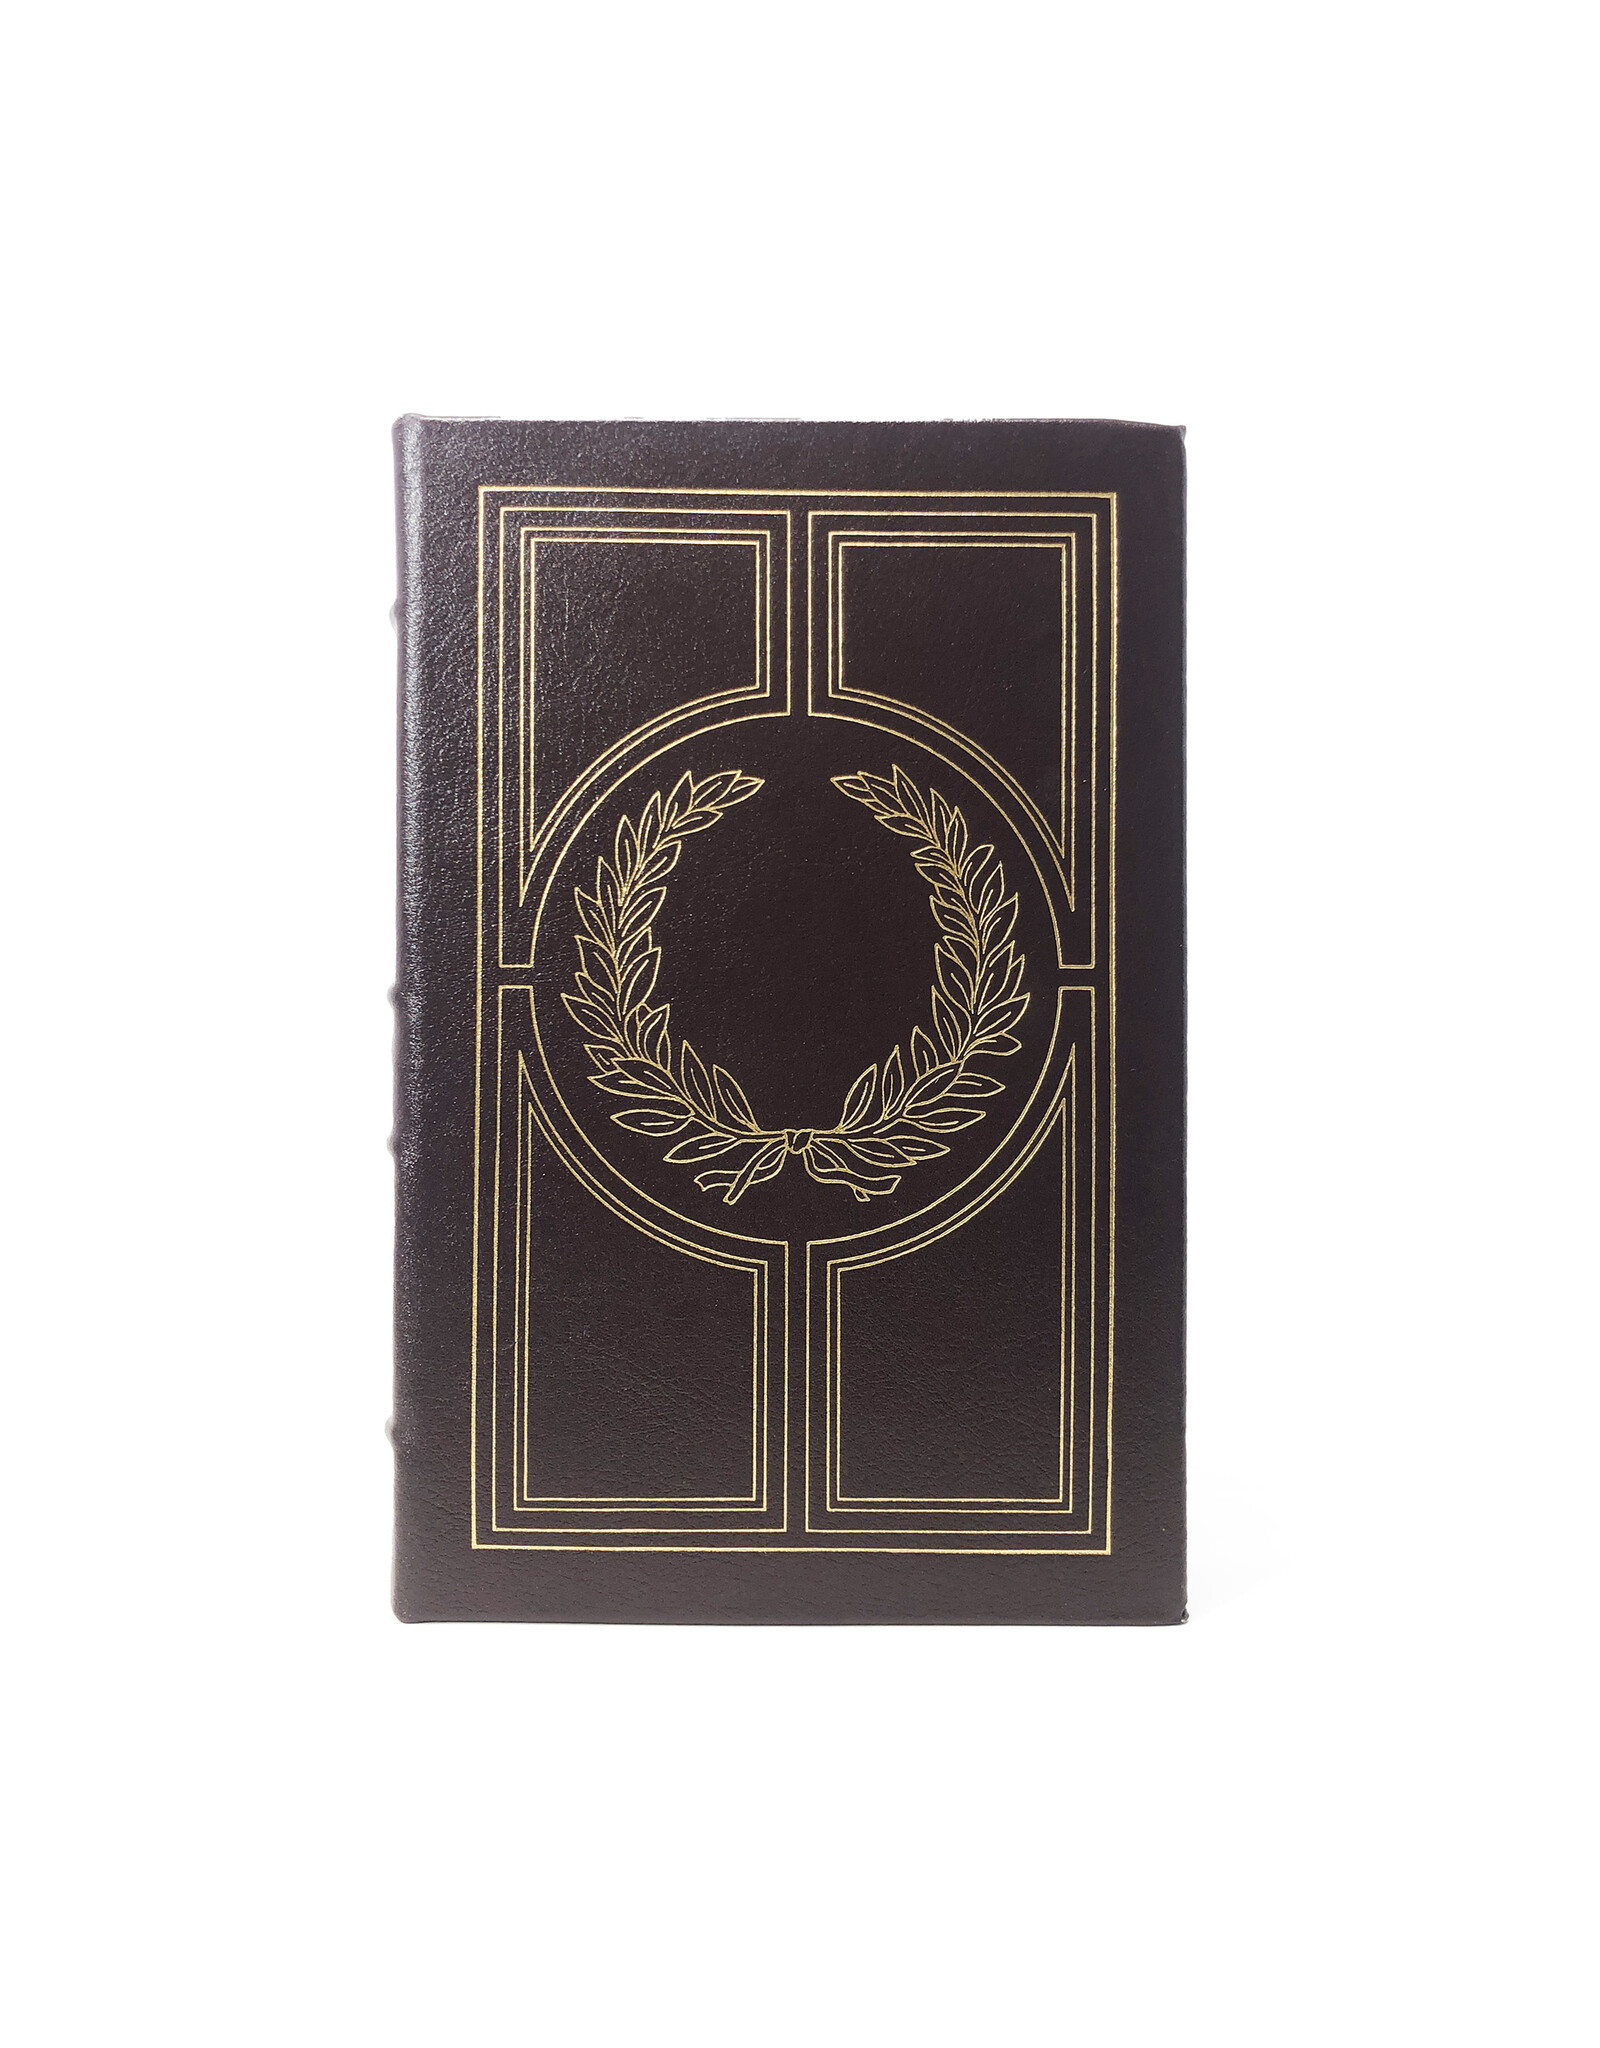 Easton Press Oedipus the King 100 Greatest Books Ever Written Genuine Leather Collector's Edition